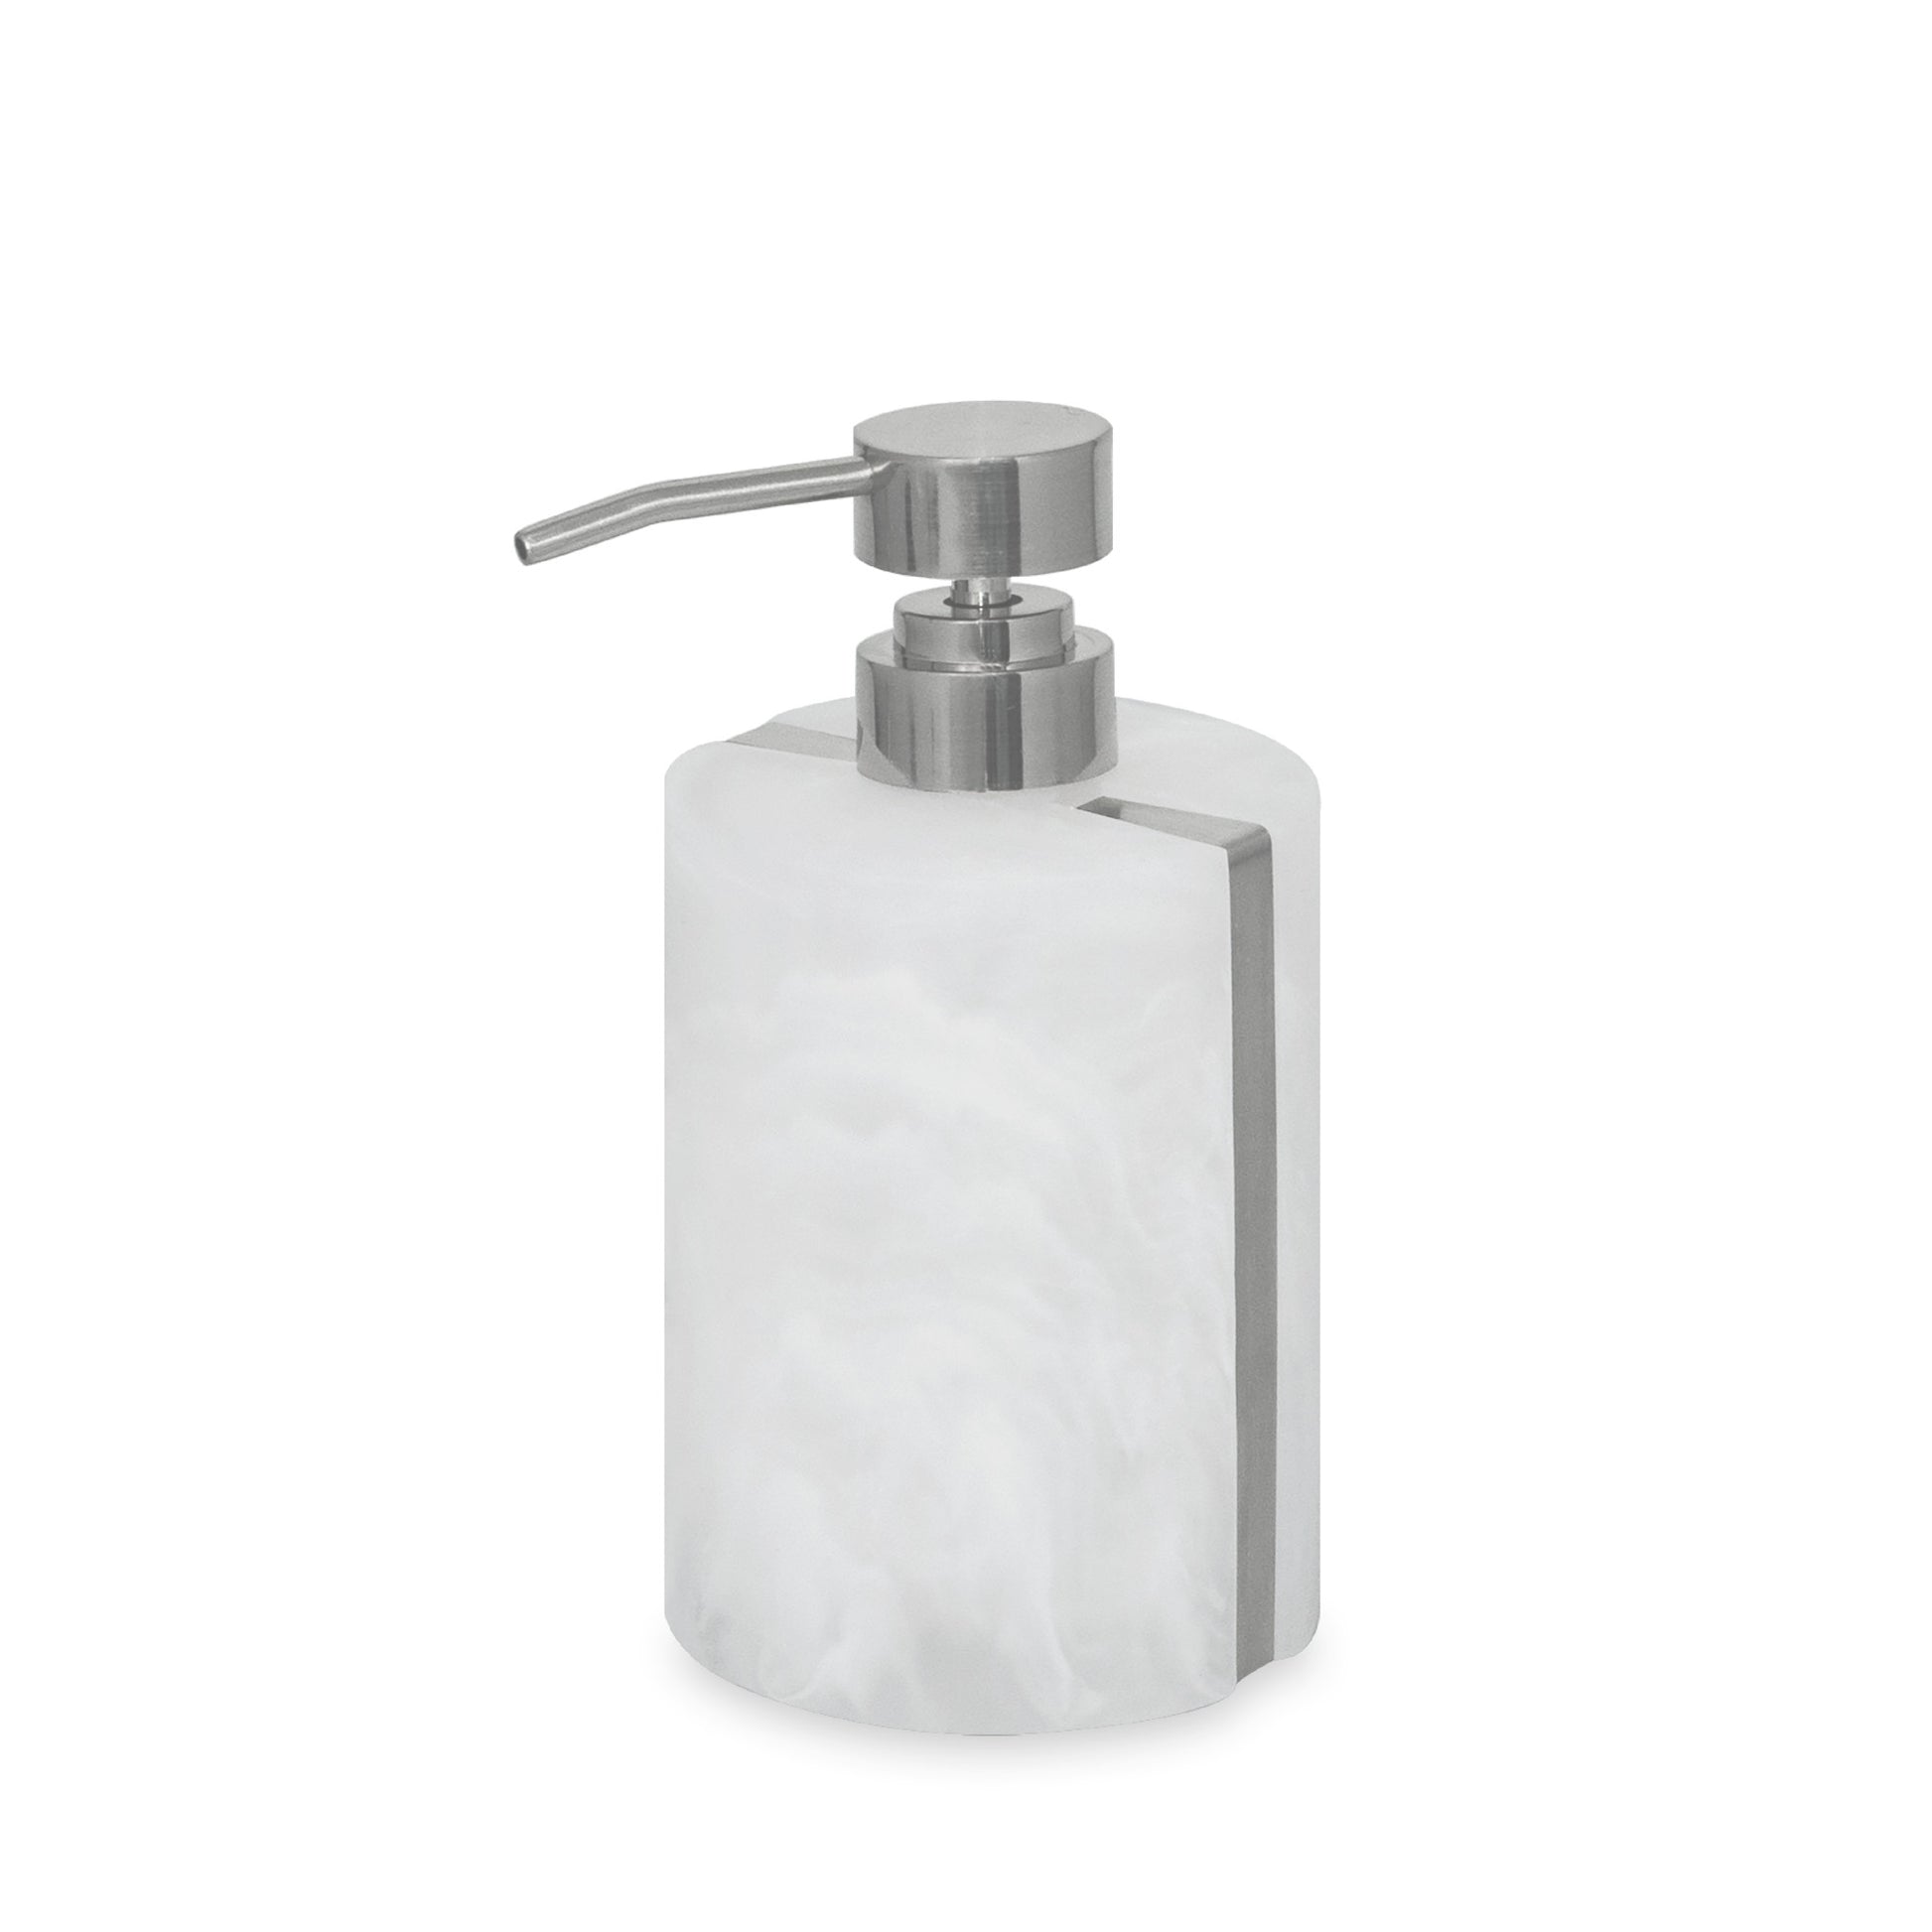 DKNY Minerale Bath Accessories Collection